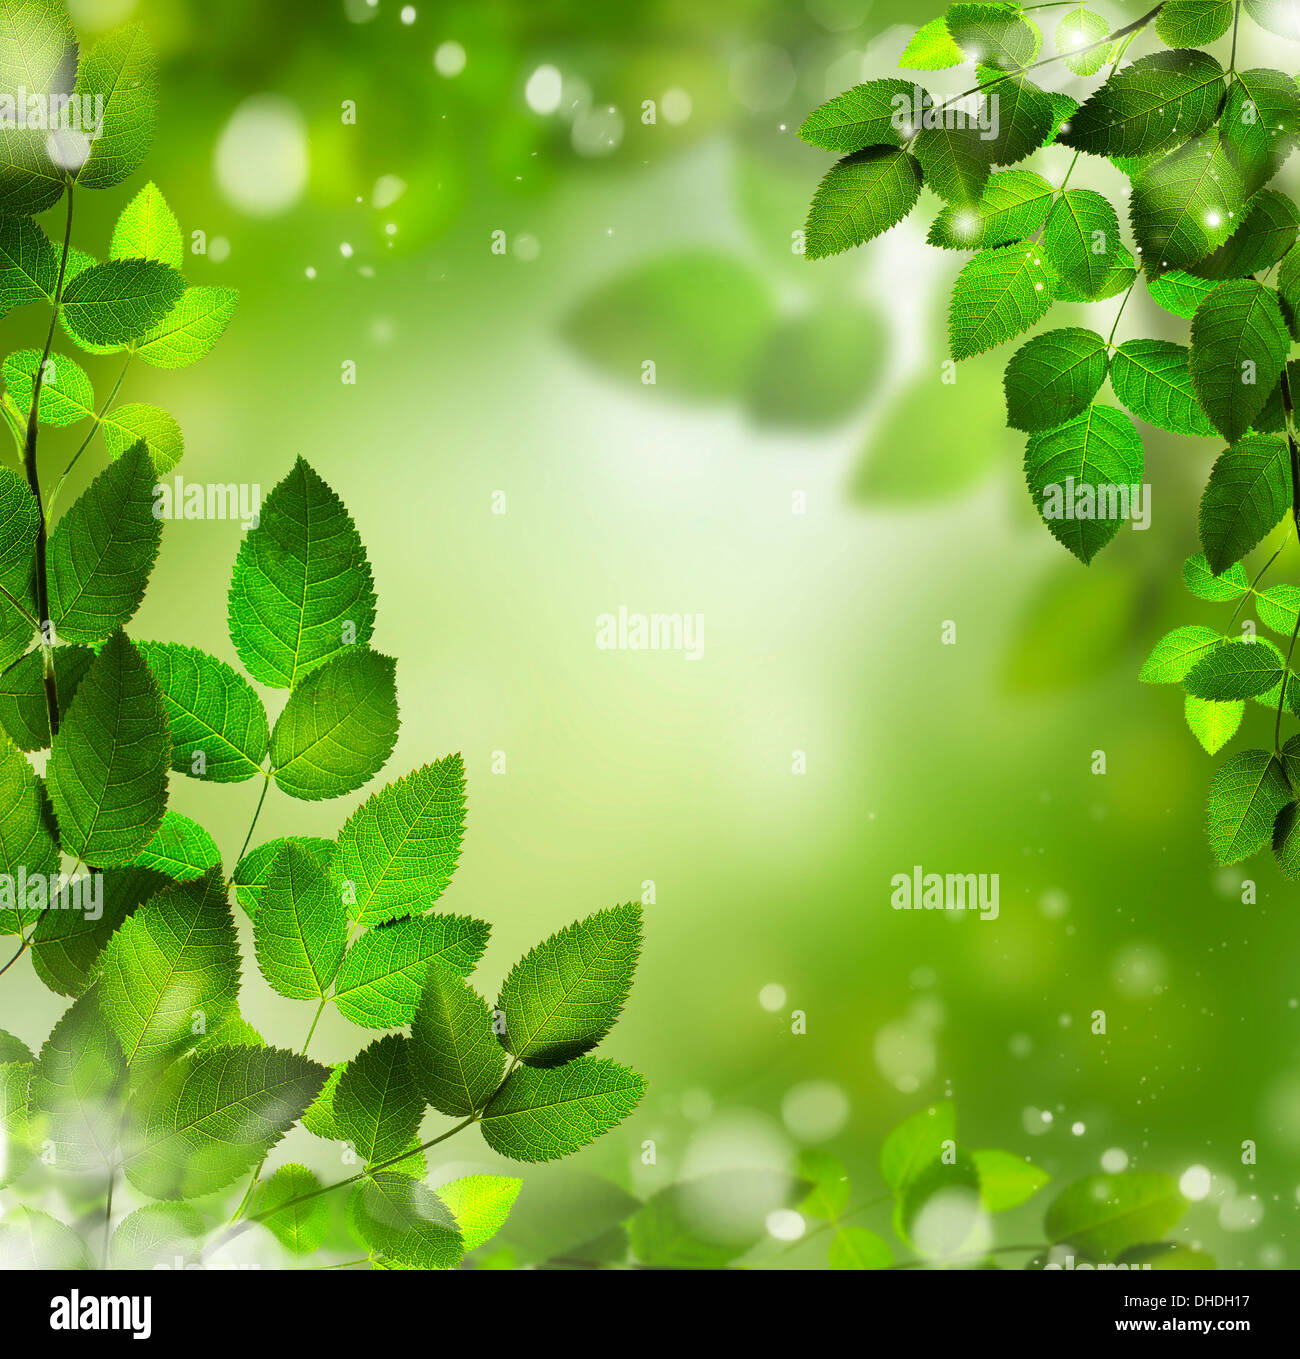 Spring or summer season abstract nature background with grass and blue sky in the back Stock Photo